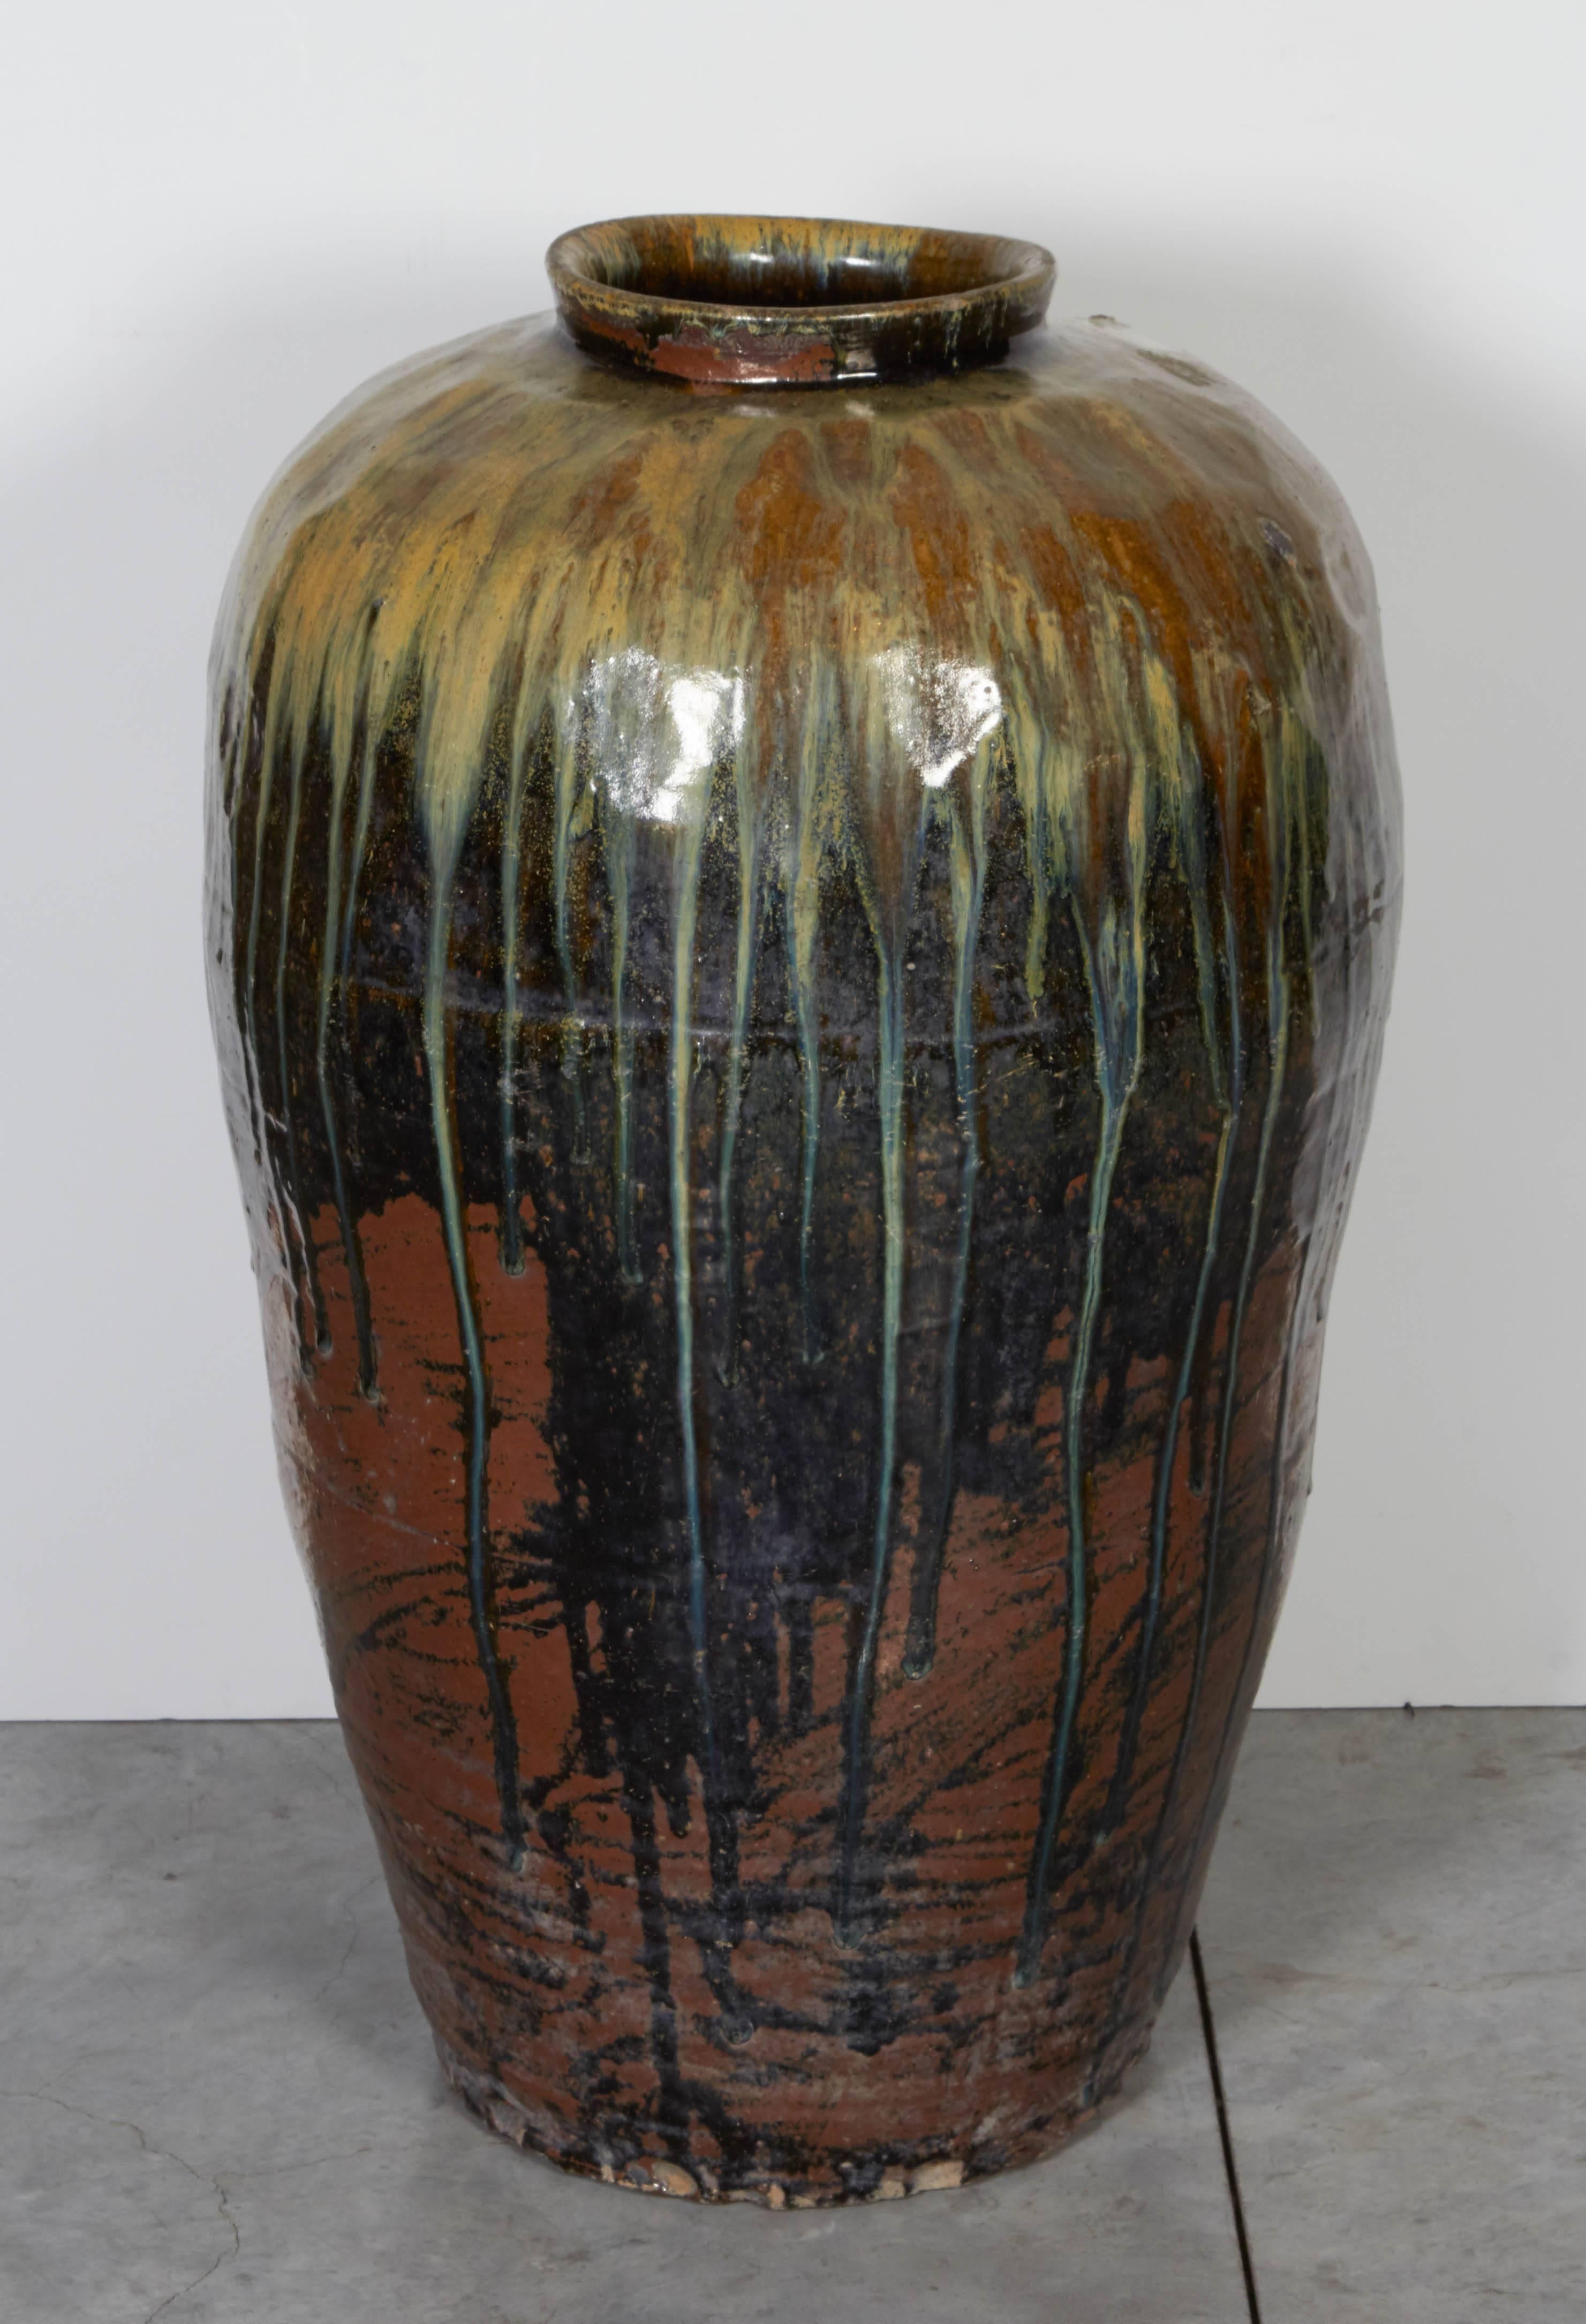 A very tall, multi-color antique Chinese ceramic jar from Shanxi Province. Beautifully glazed and gracefully shaped.
CR713.